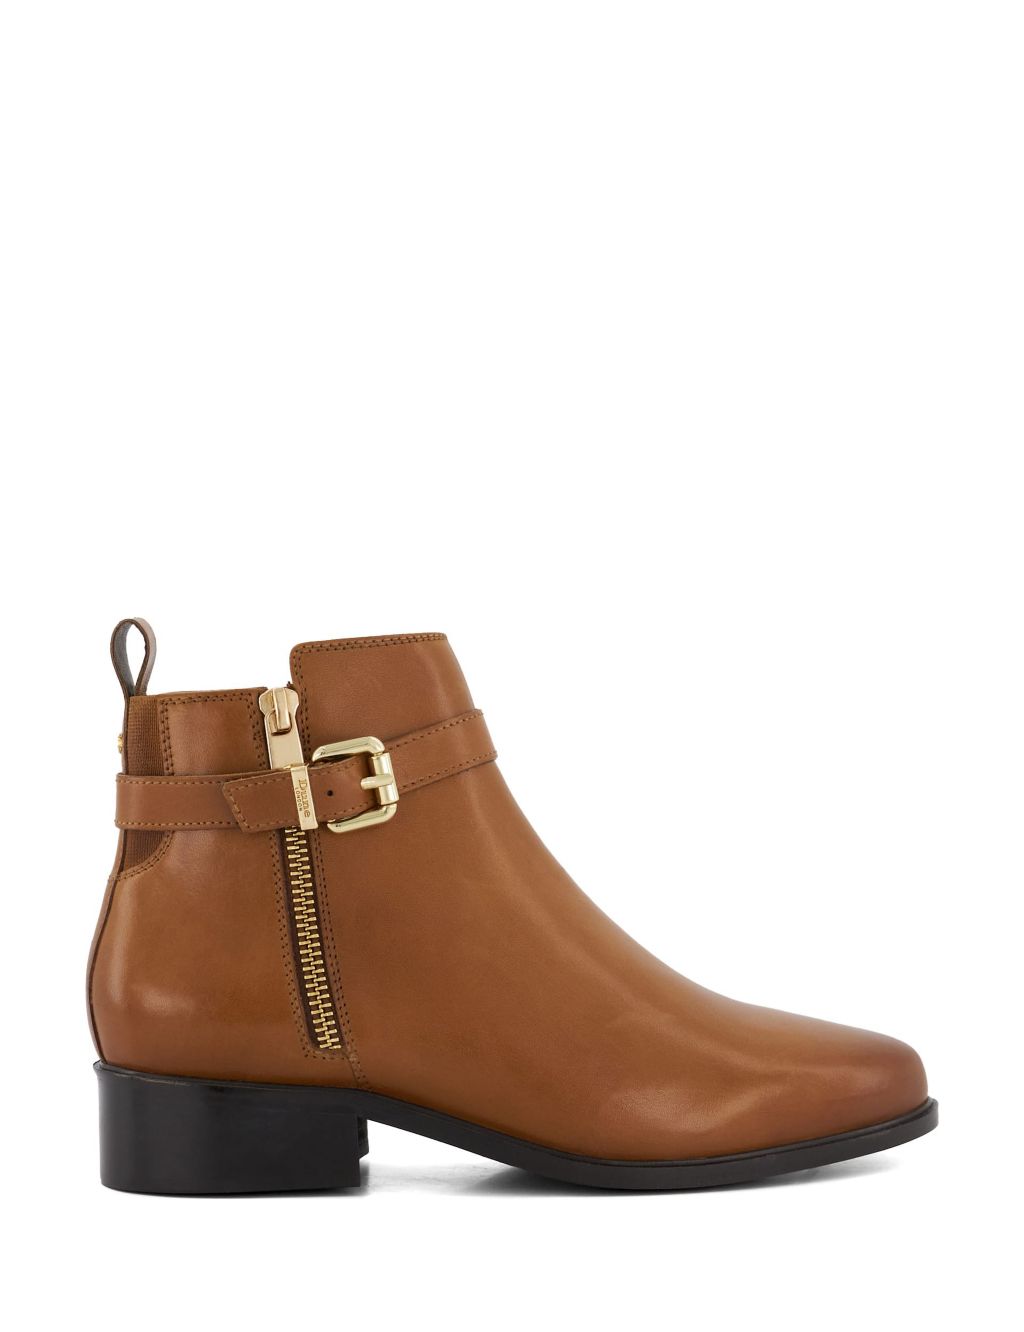 Leather Buckle Ankle Boots